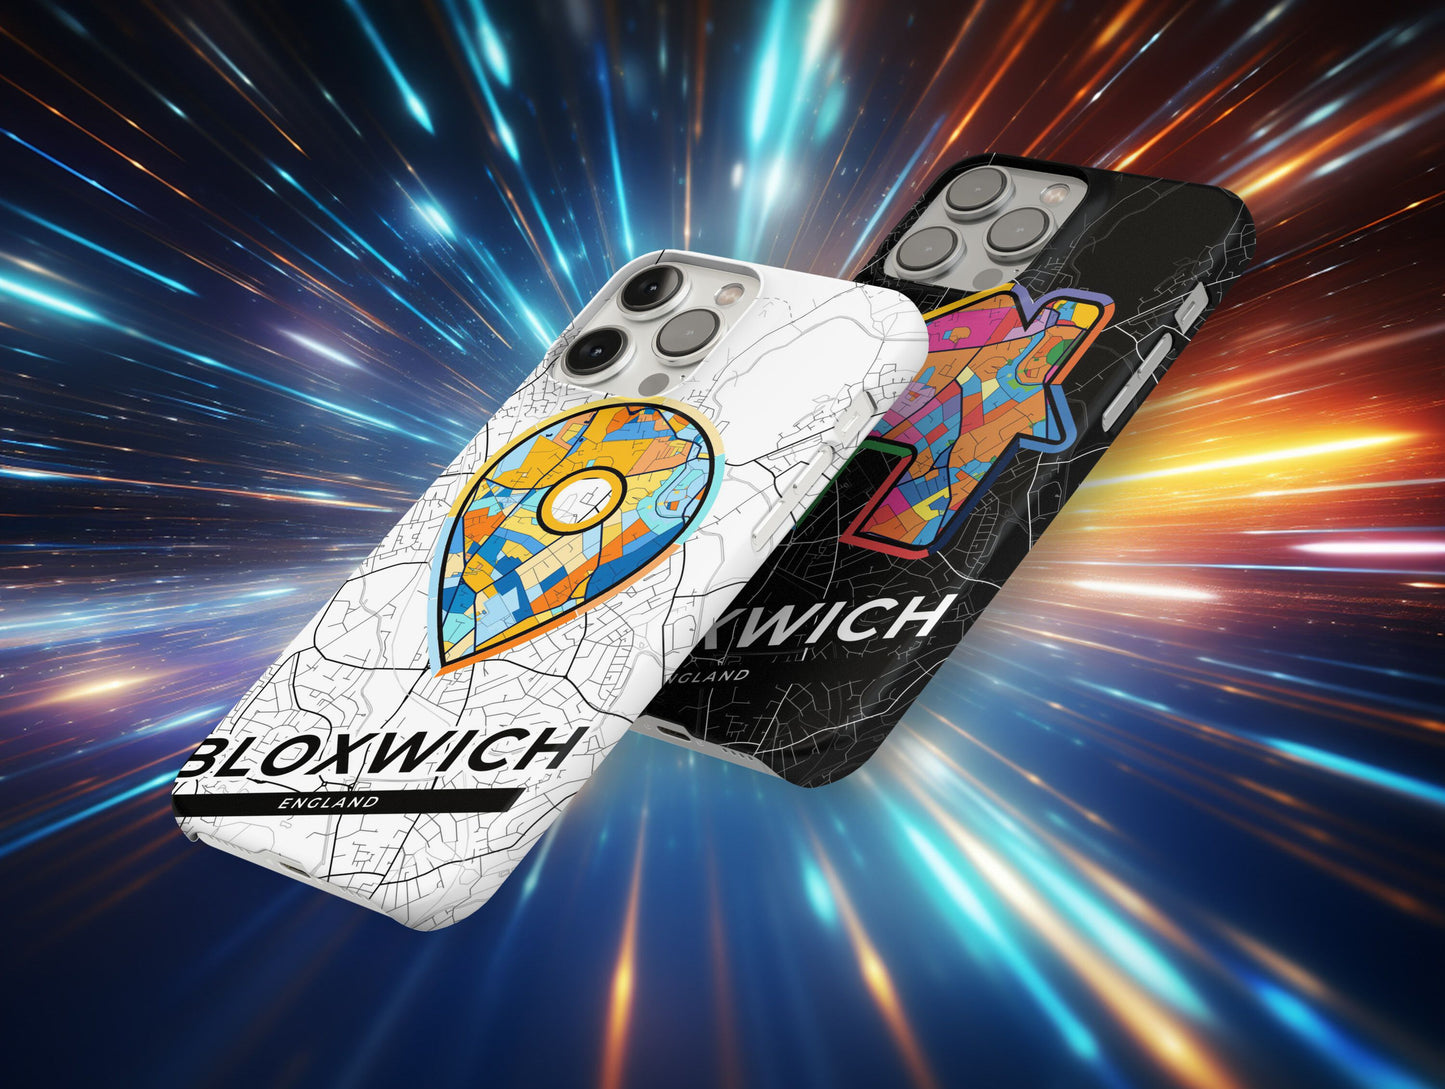 Bloxwich England slim phone case with colorful icon. Birthday, wedding or housewarming gift. Couple match cases.